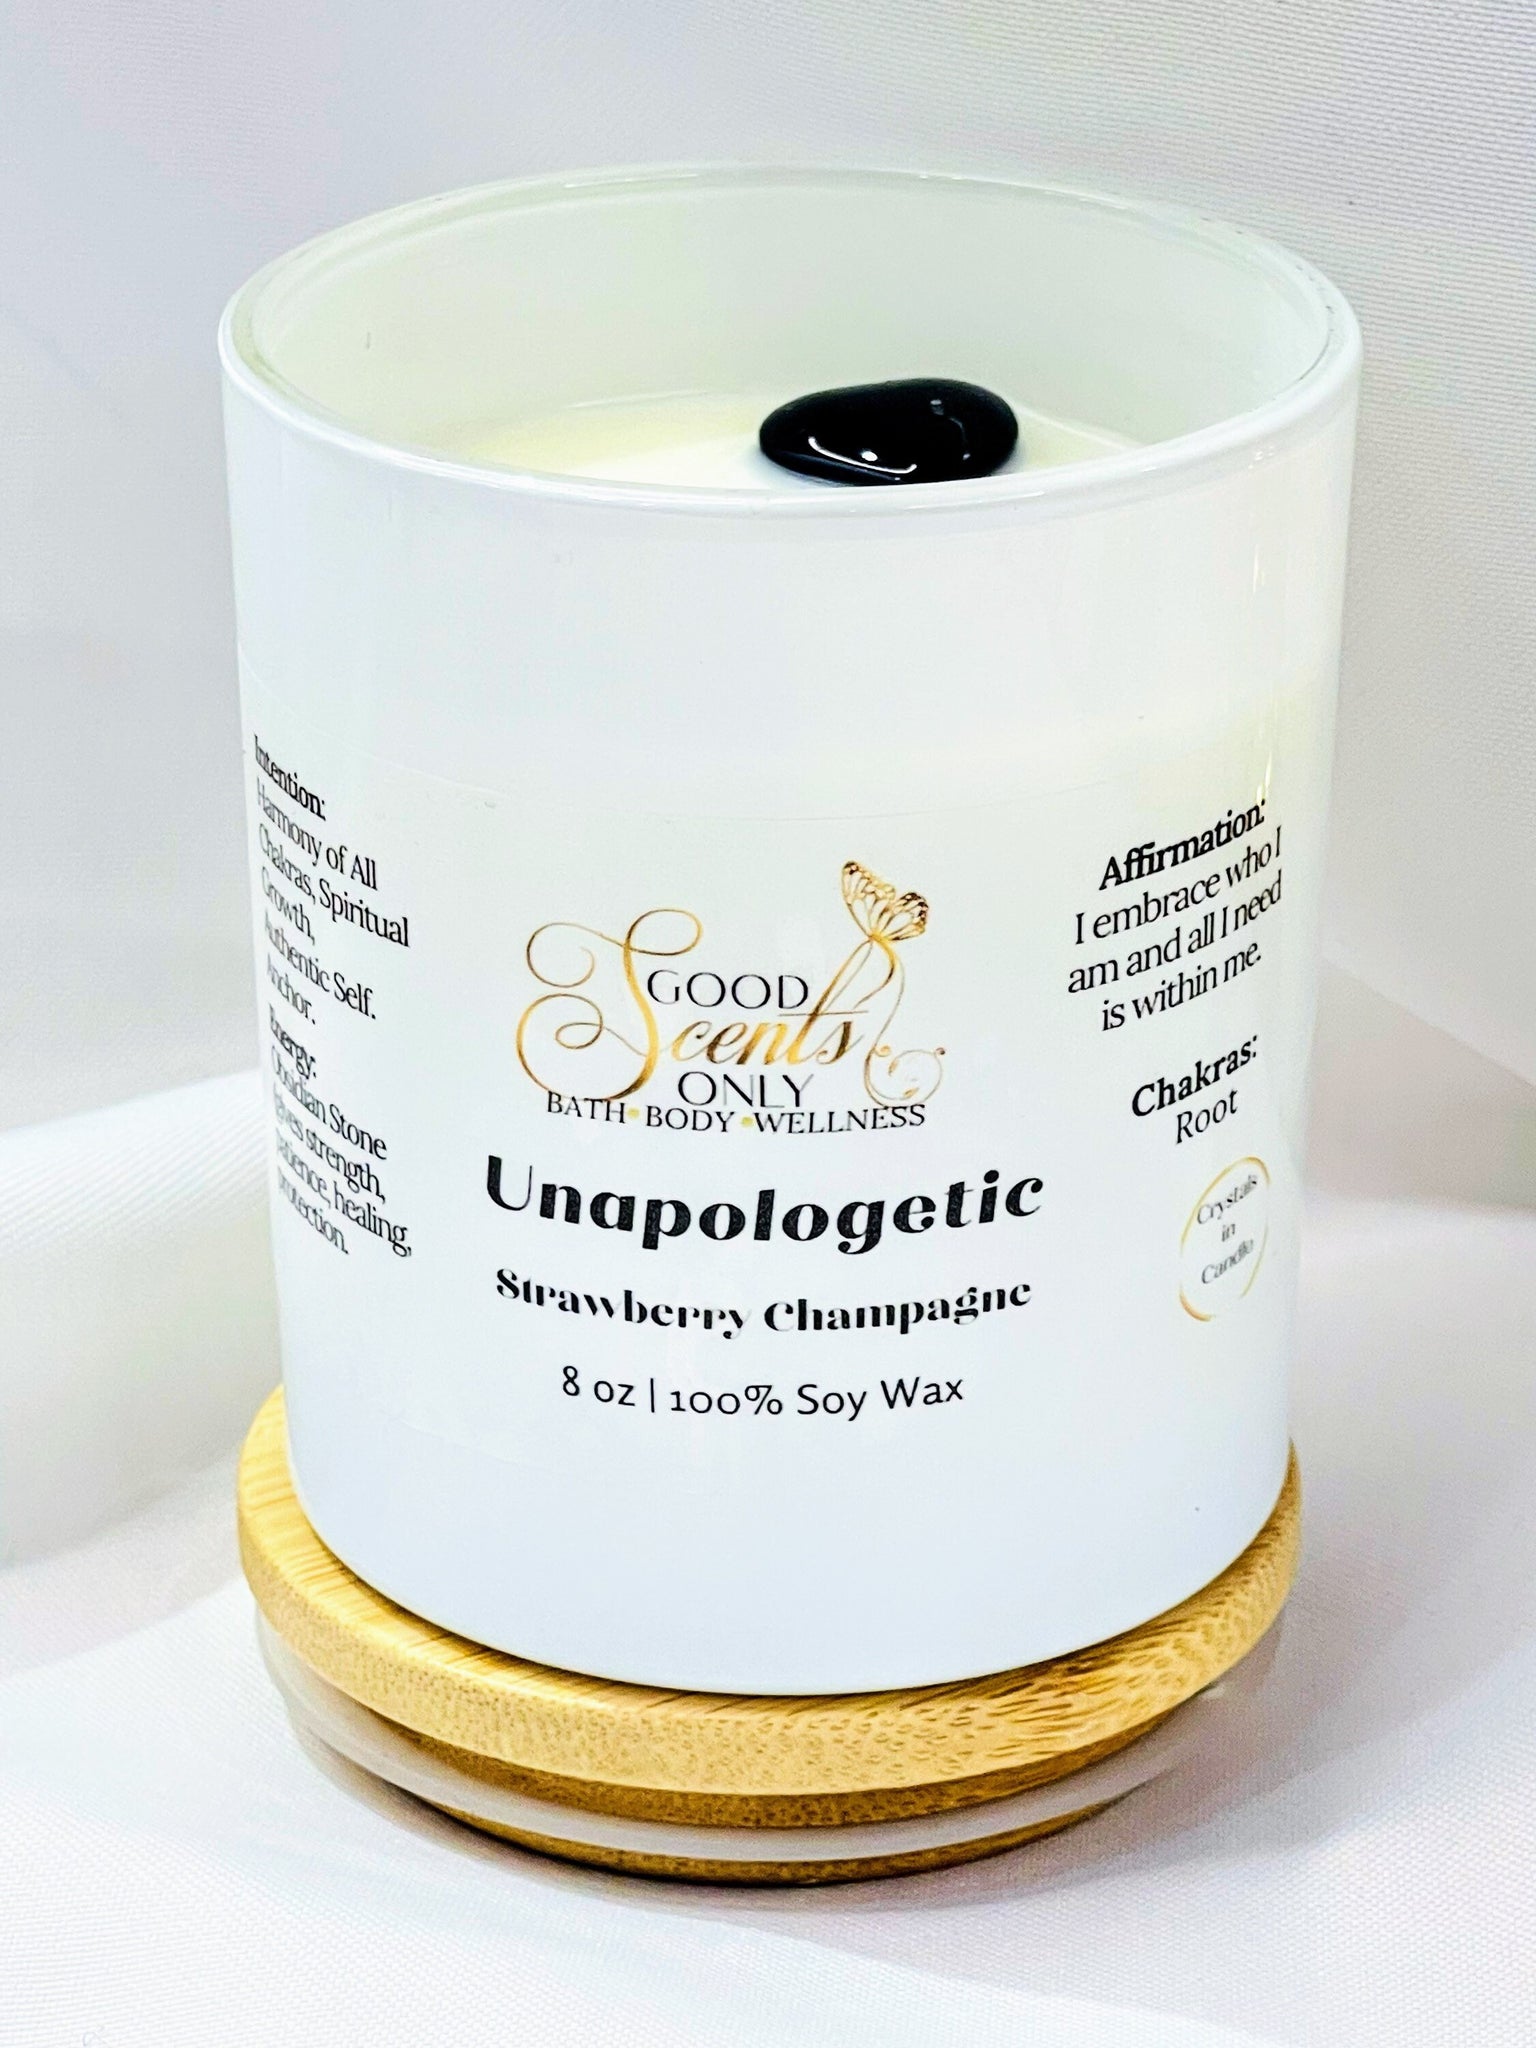 Unapologetic Crystal Energy Manifestation Candle. Be you be true be authentic great gifts for her, gifts for mom, Valentines gift